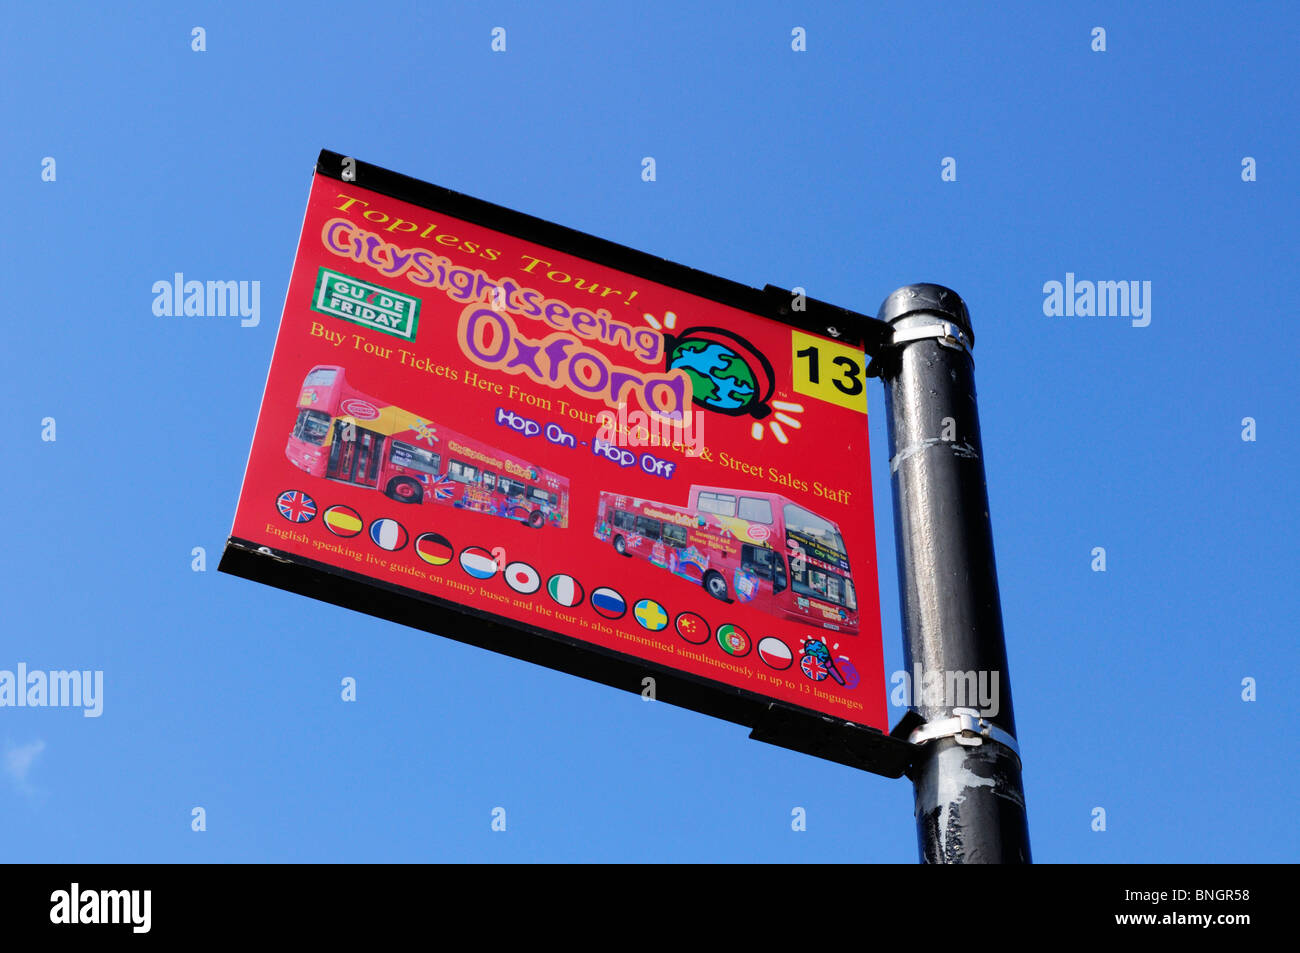 City Sightseeing Oxford Bus stop sign against a blue sky, Oxford, England, UK Stock Photo